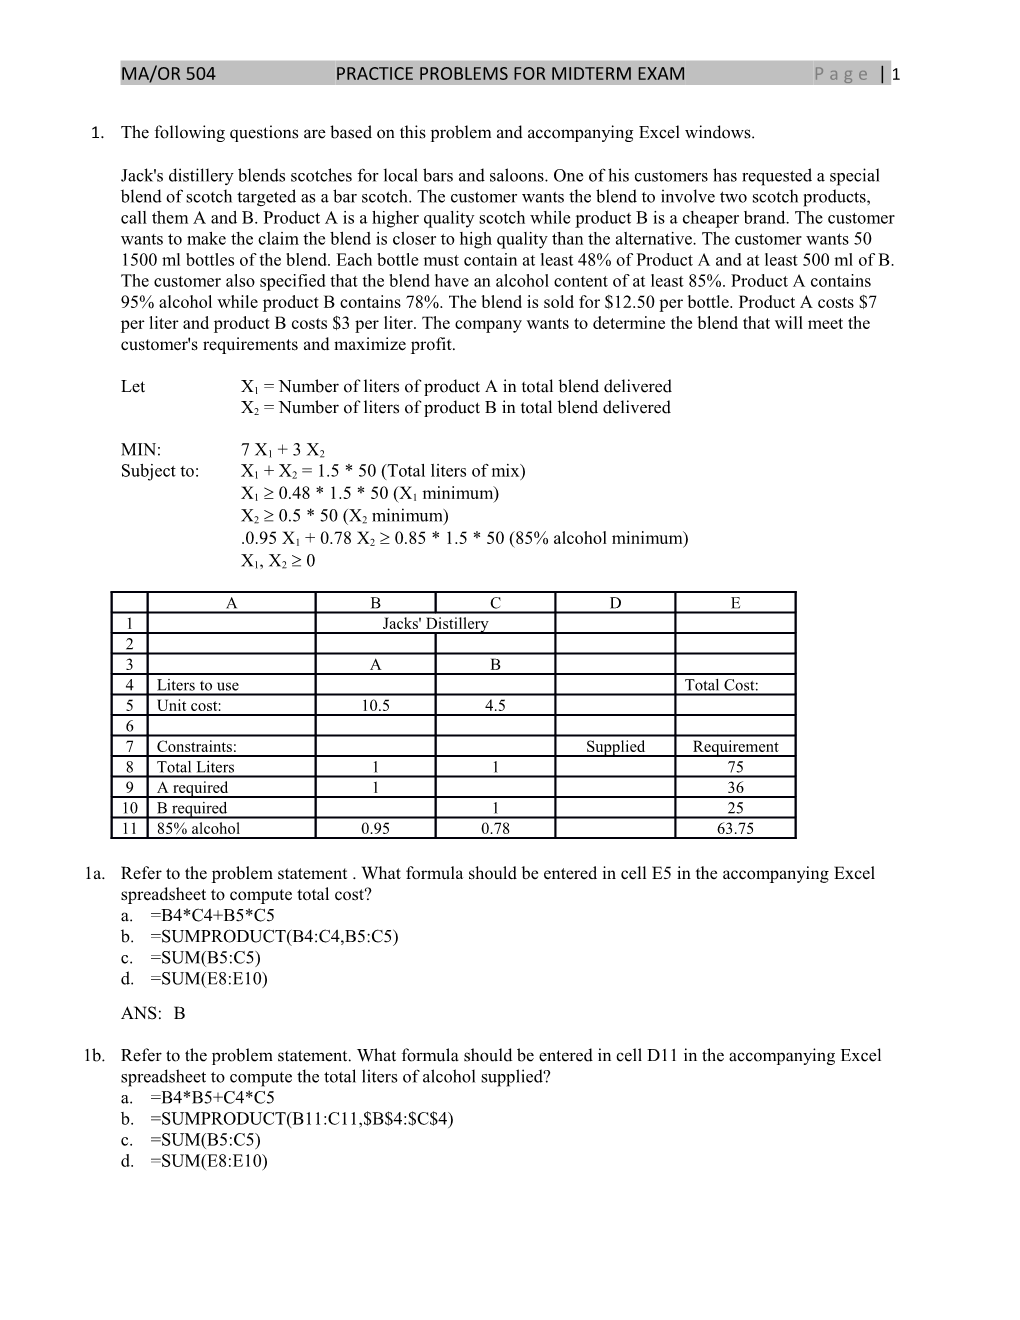 MA/OR 504PRACTICE PROBLEMS for MIDTERM Exampage 1